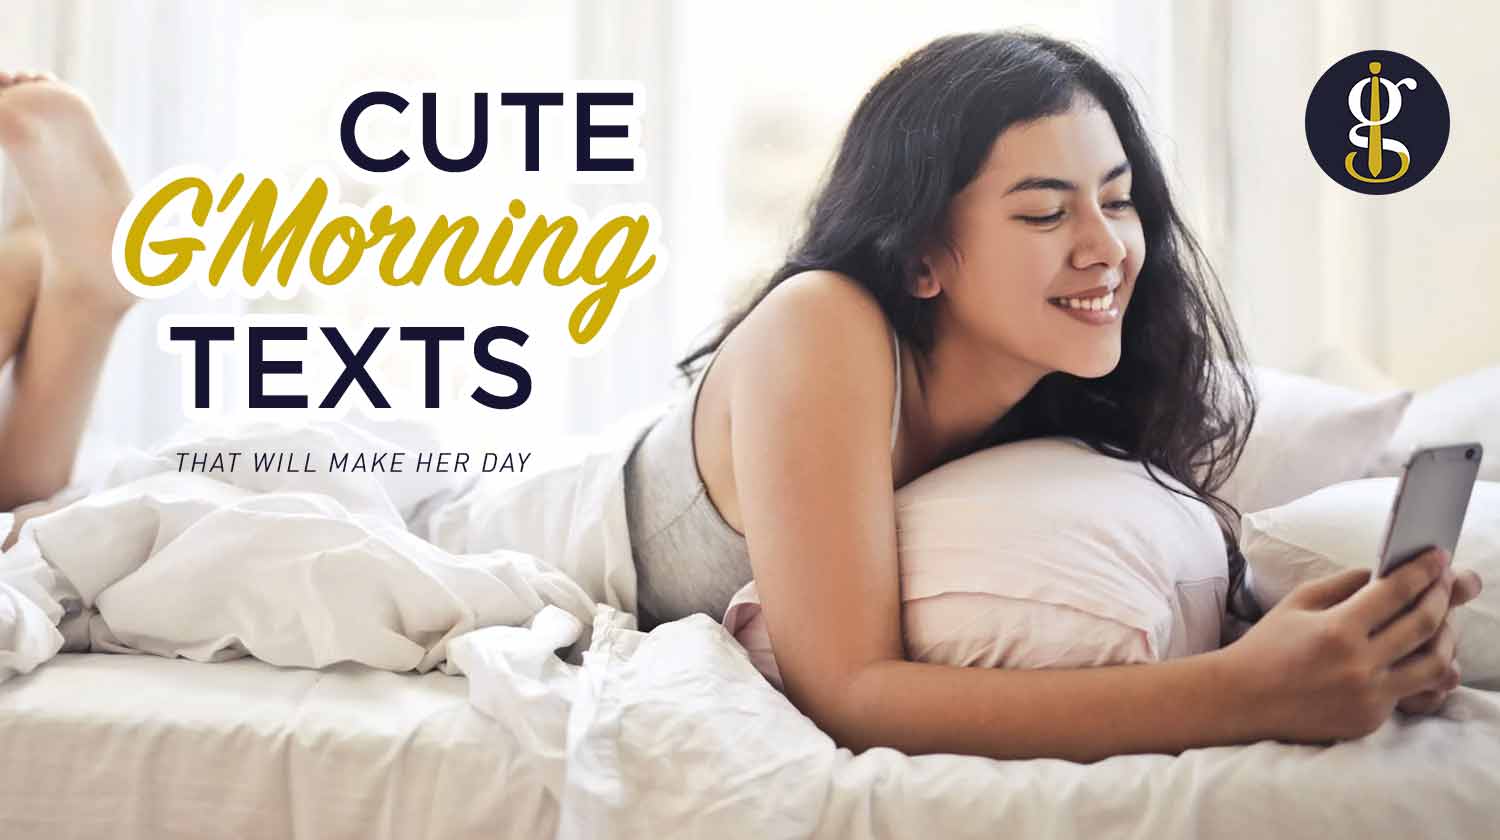 Cute Good Morning Texts for Her That Will Make Her Day Hero